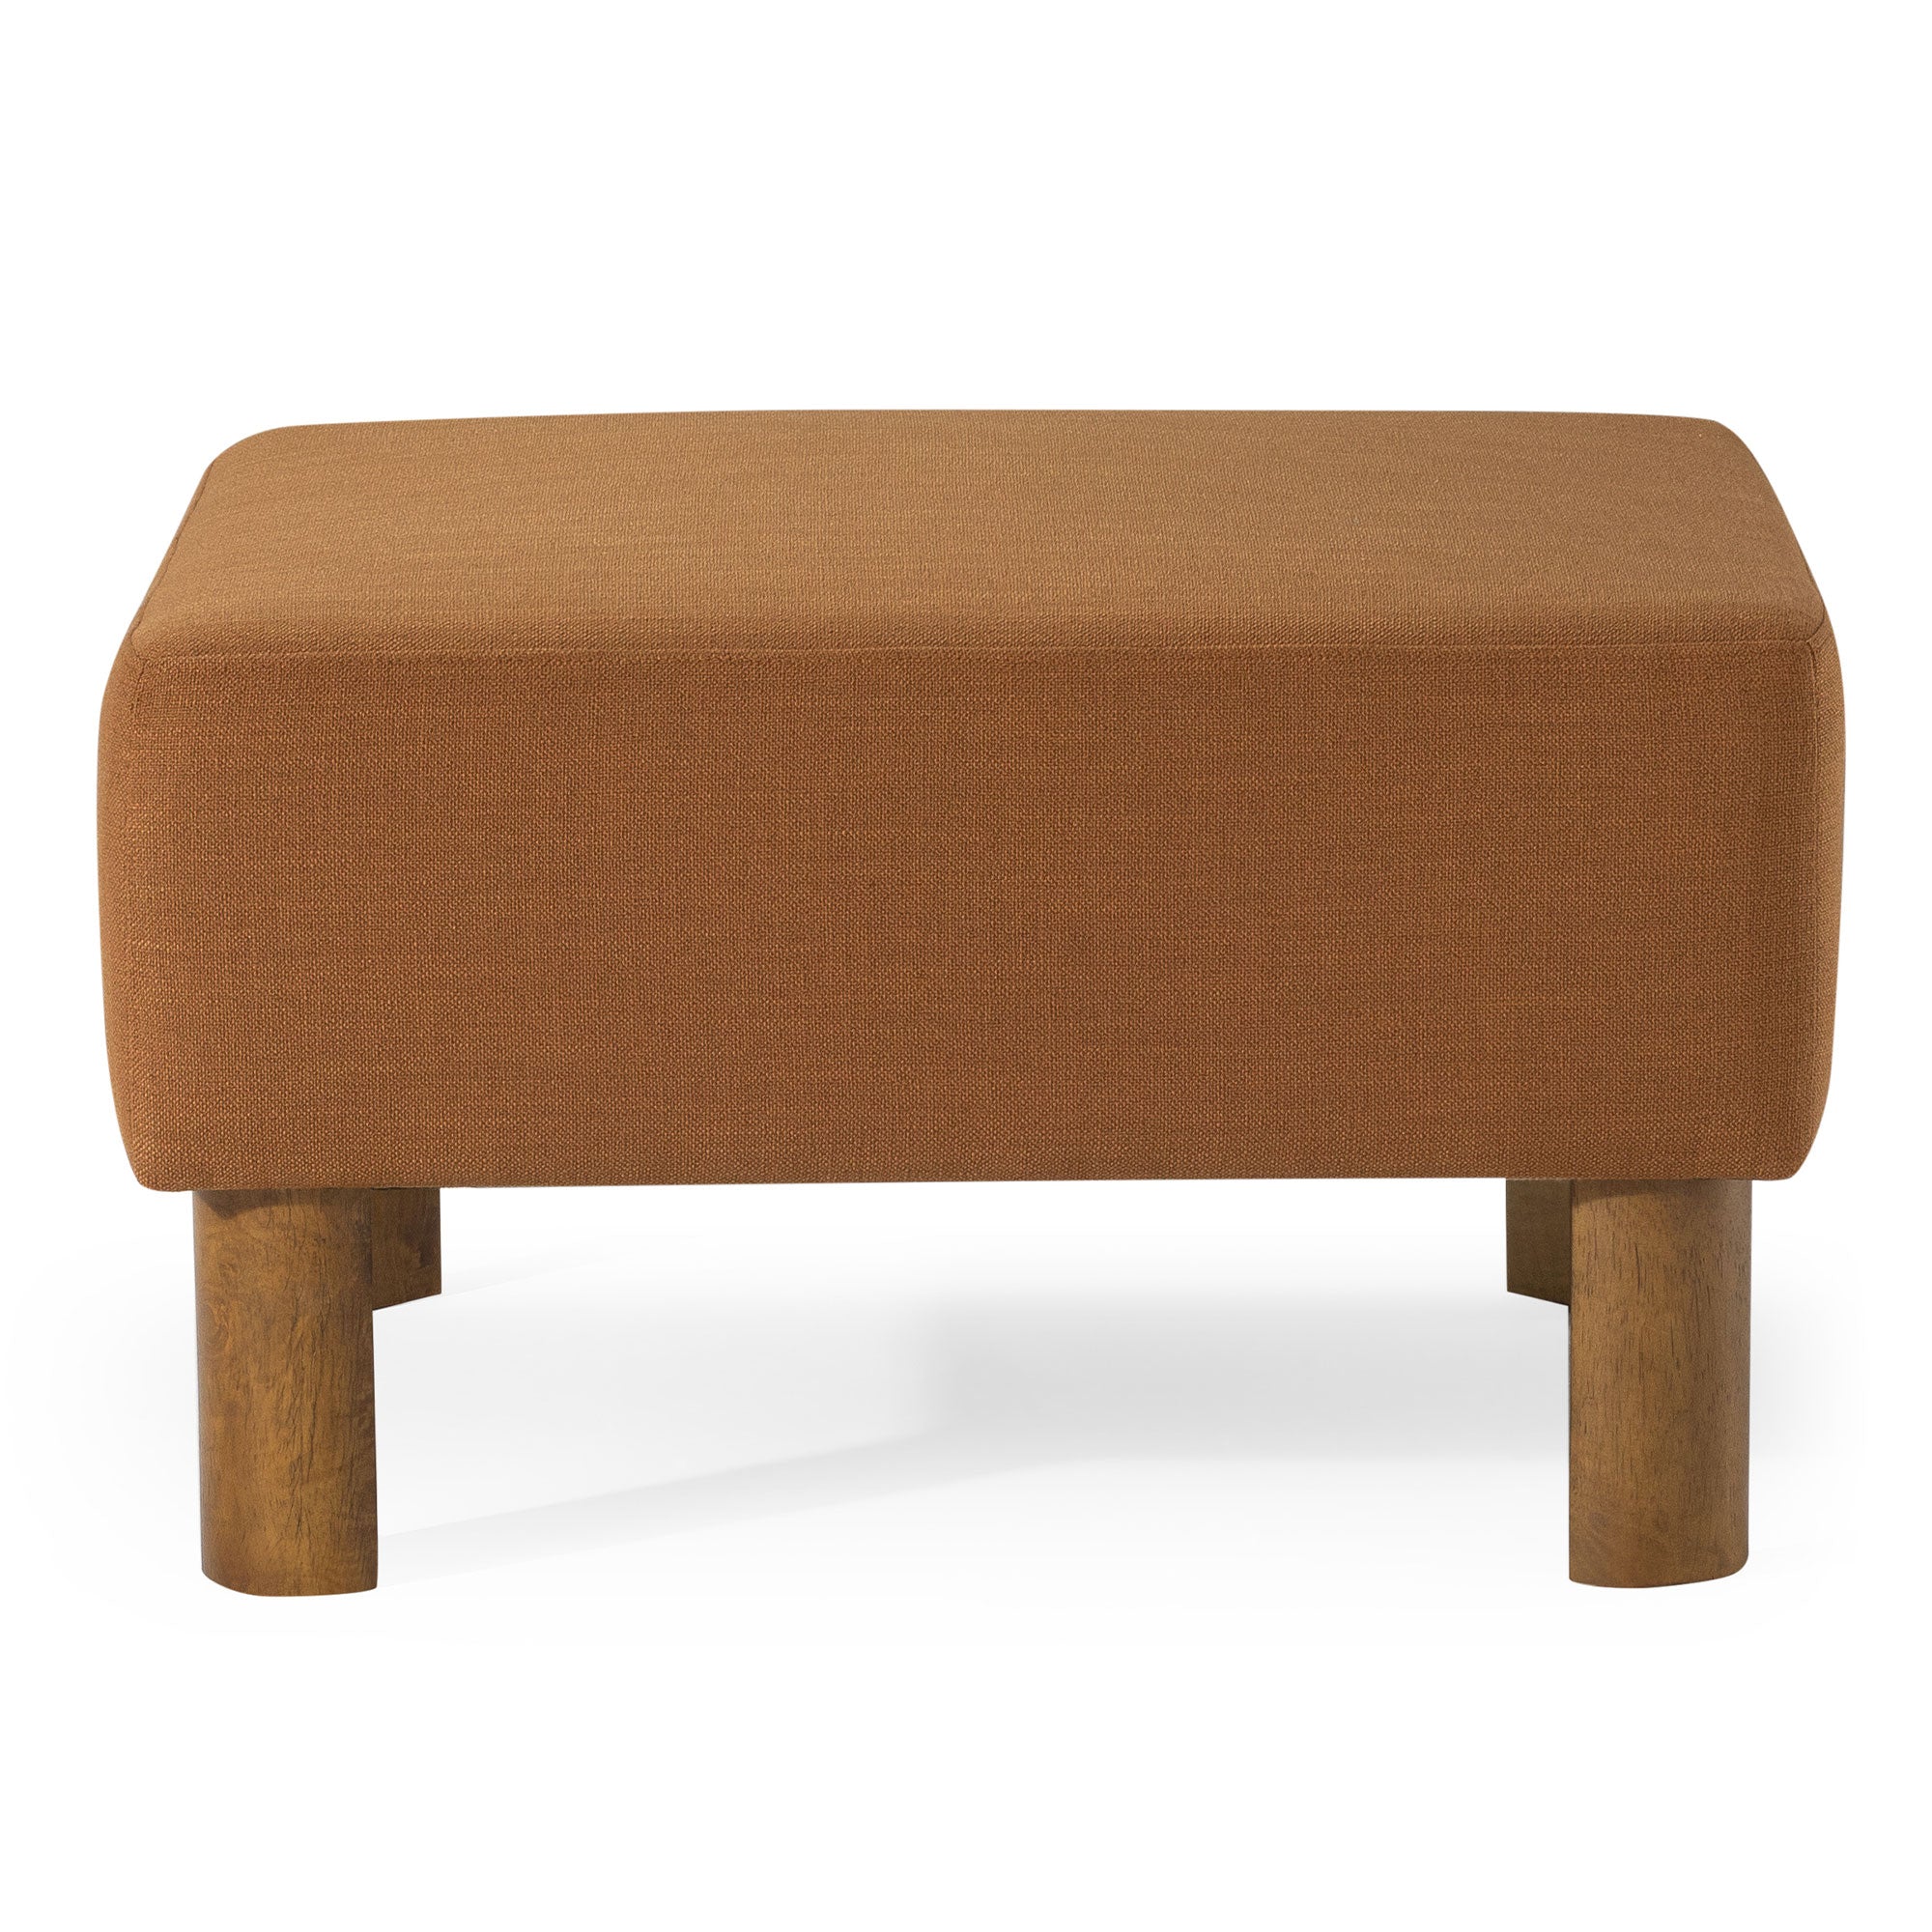 Lena Contemporary Upholstered Ottoman with Refined Brown Wood Finish in Ottomans & Benches by Maven Lane